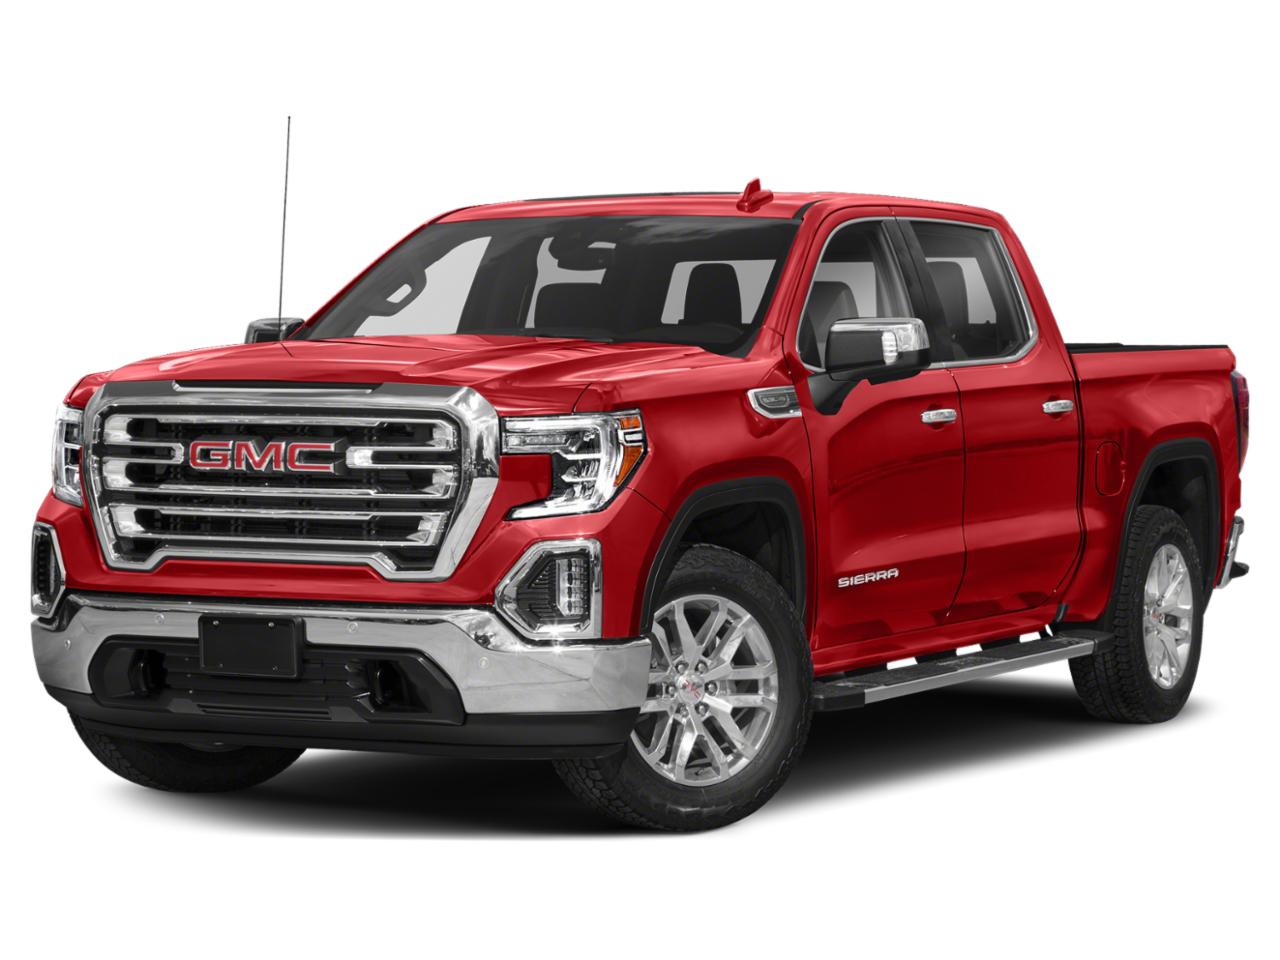 New 2021 GMC Sierra 1500 Crew Cab Short Box 4-Wheel Drive SLT in Cayenne Red Tintcoat for sale ...